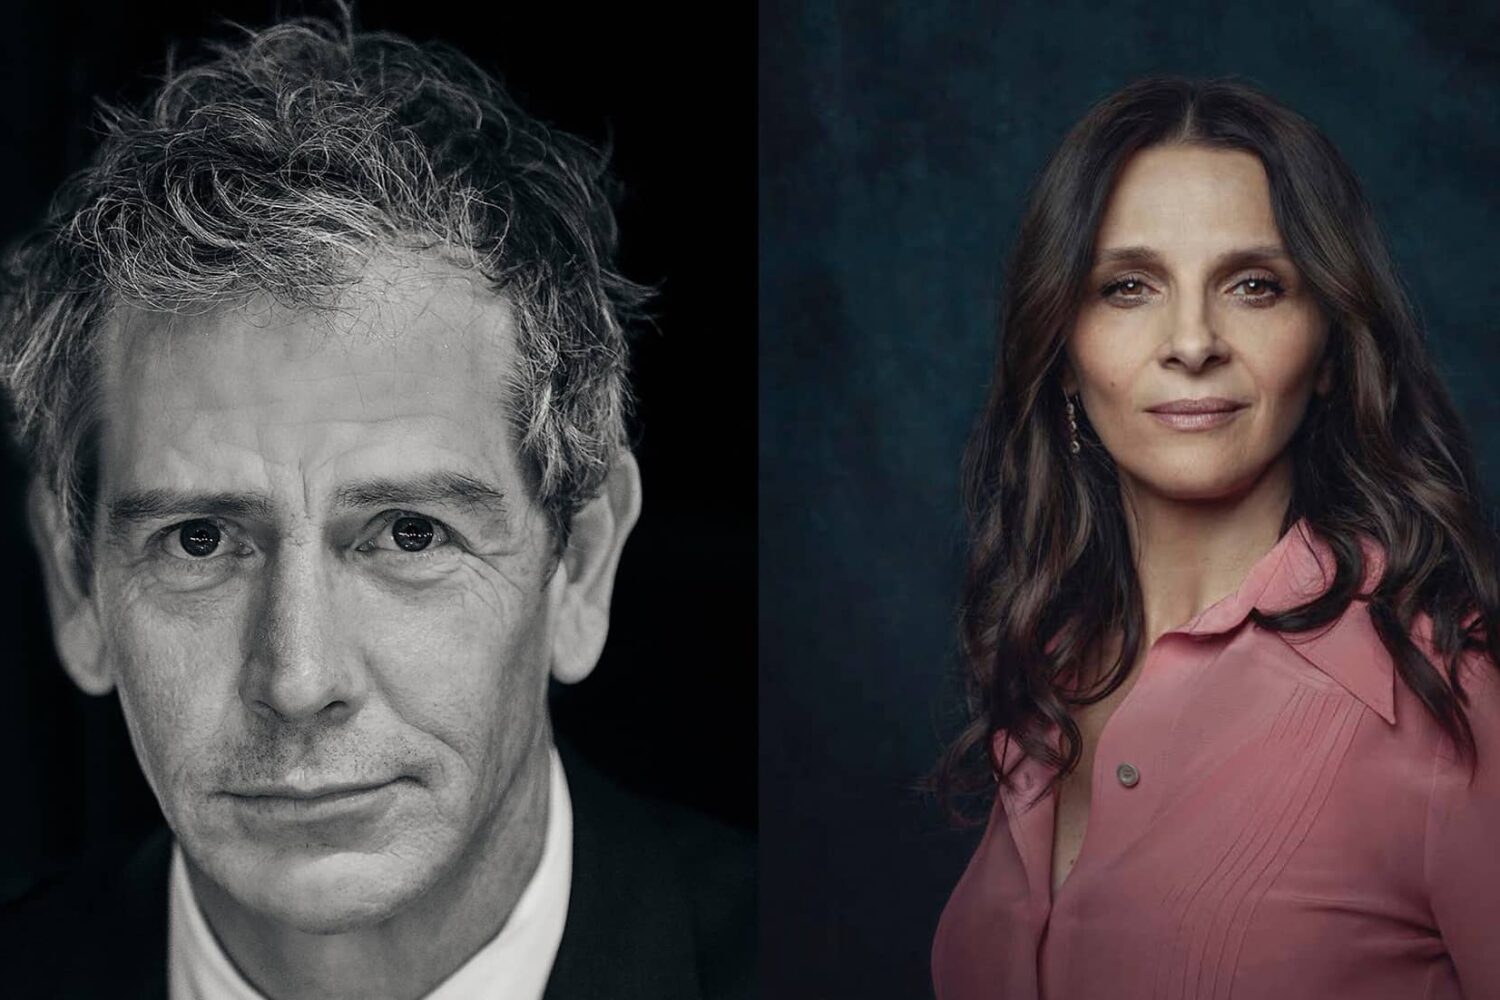 Promotional image for the Apple TV+ drama series “The New Look” with two headshots: actor Ben Mendelsohn (left), who portrays Christian Dior, and actress Juliette Binoche (right), who plays Coco Chanel